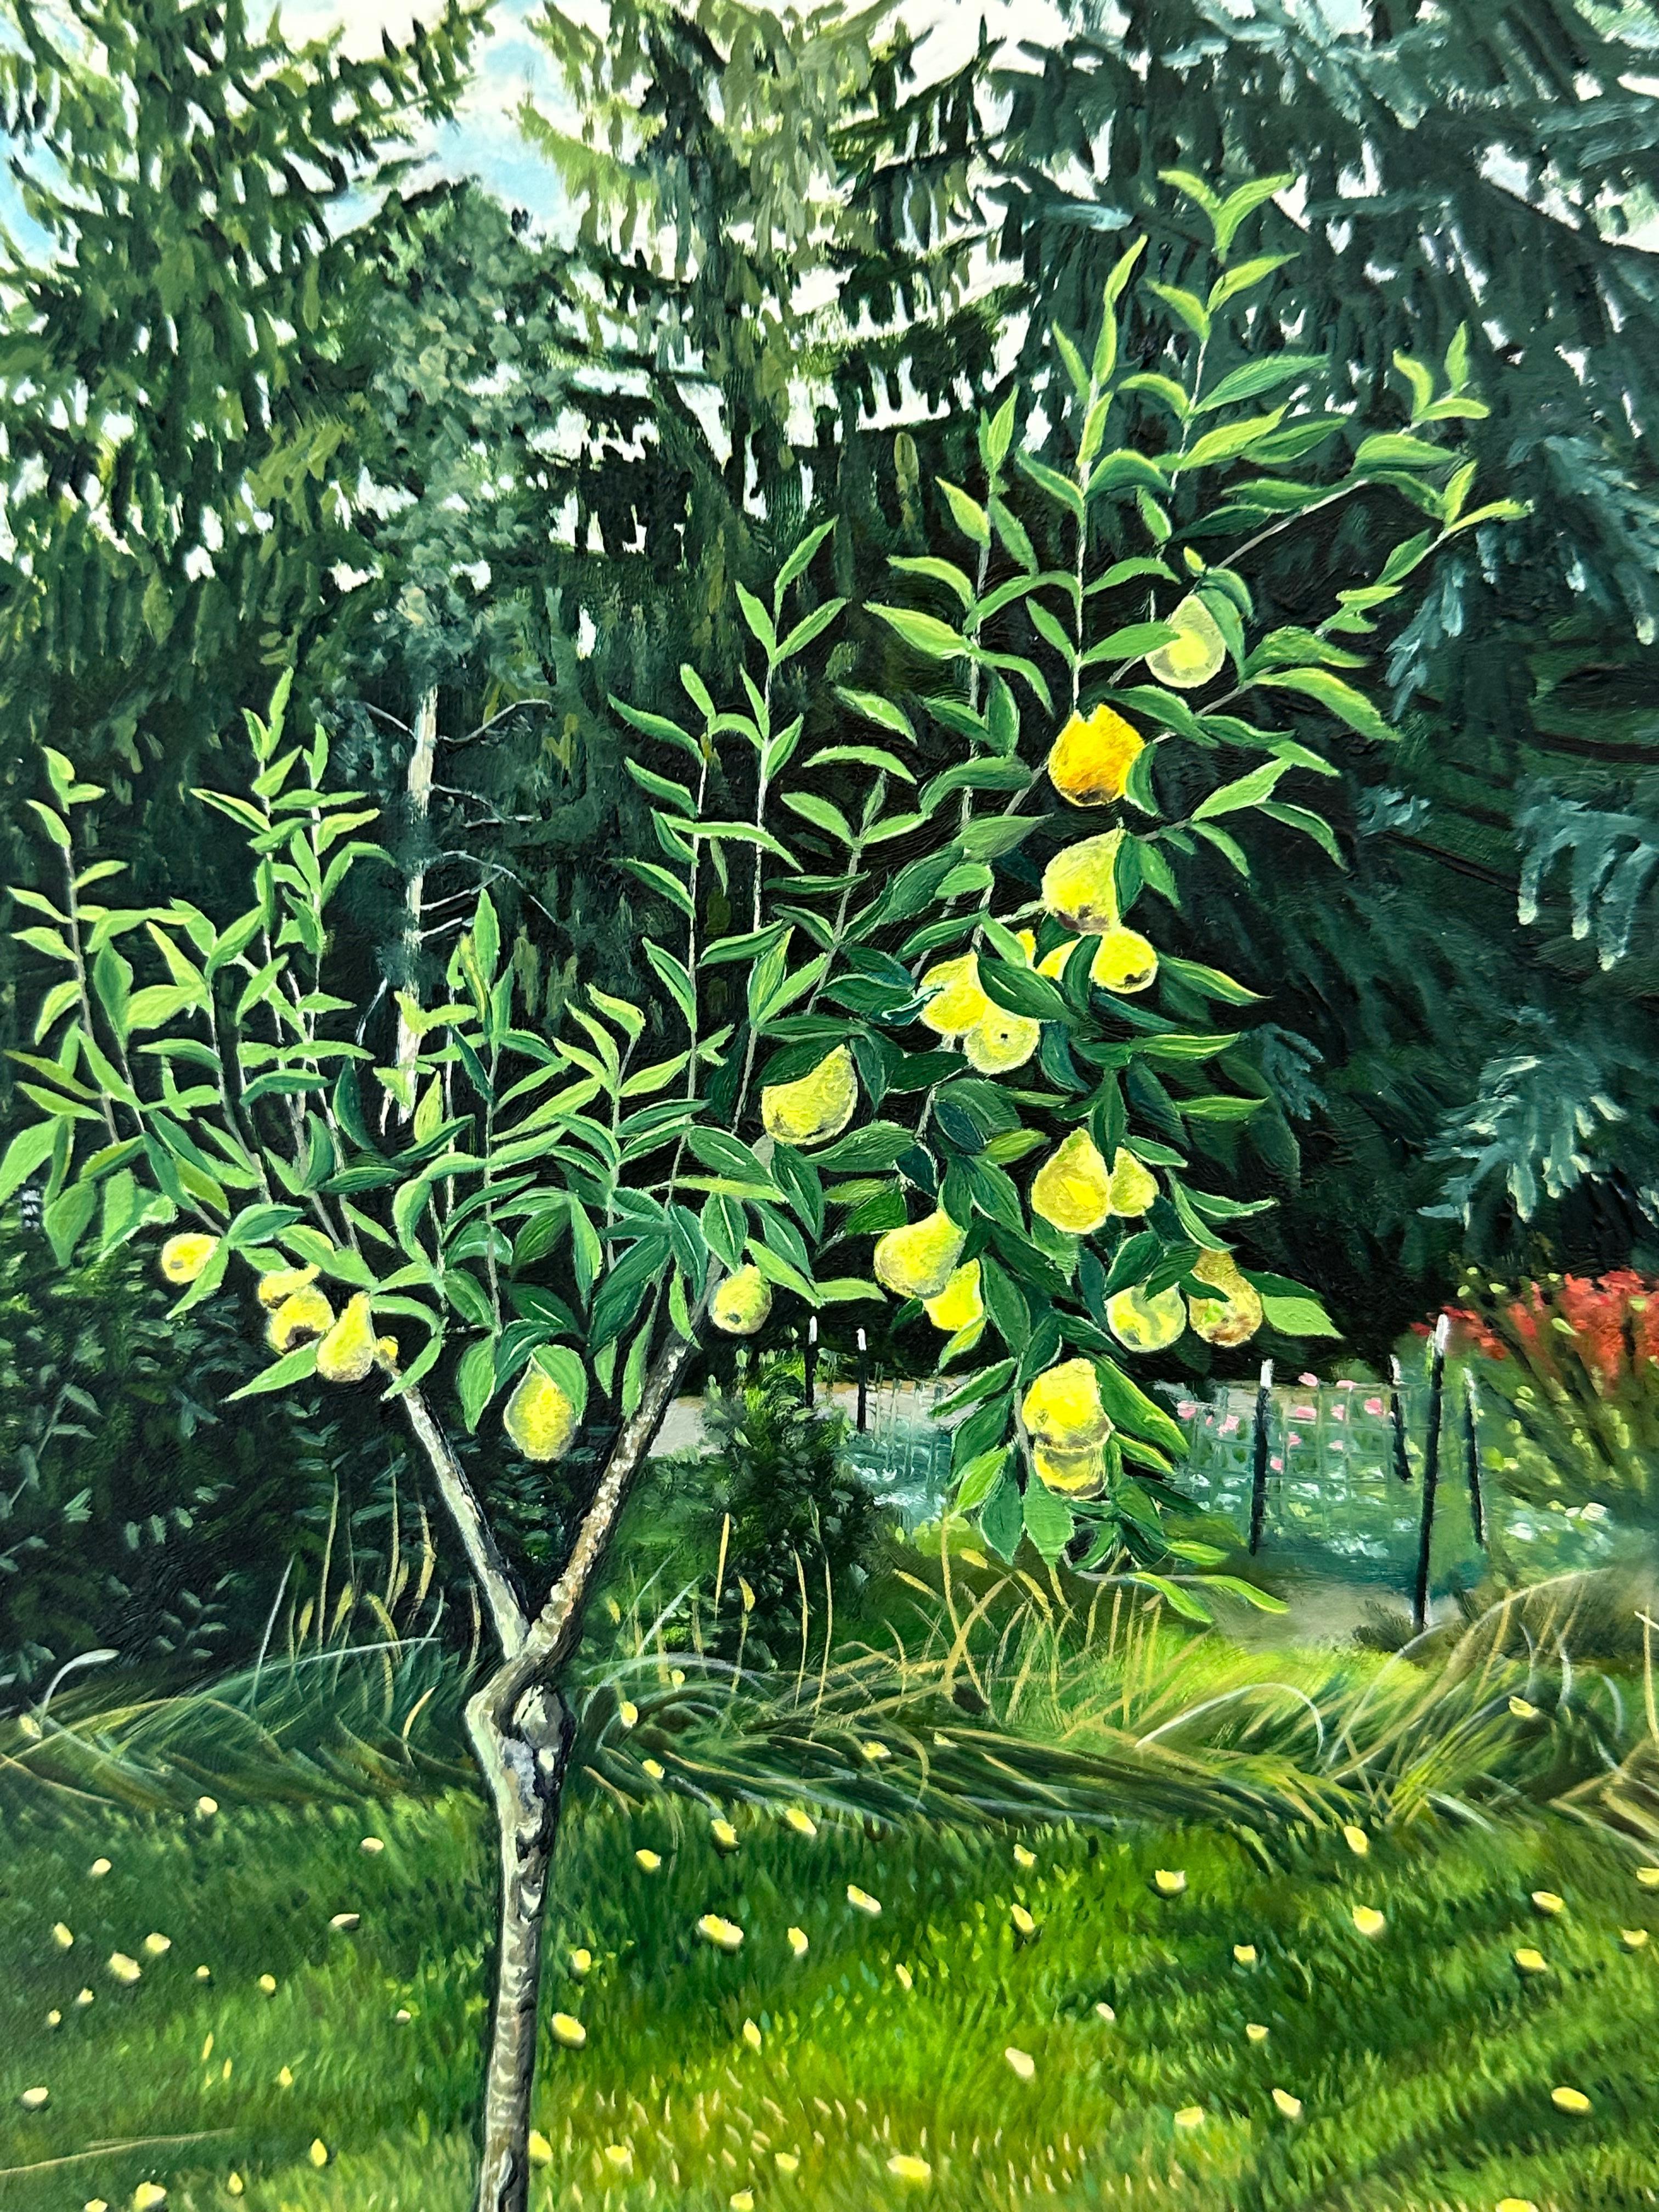 Backyard Pear, Yellow Fruit, Green Leaves, Grass, Trees, Blue Sky Clouds, Garden For Sale 1